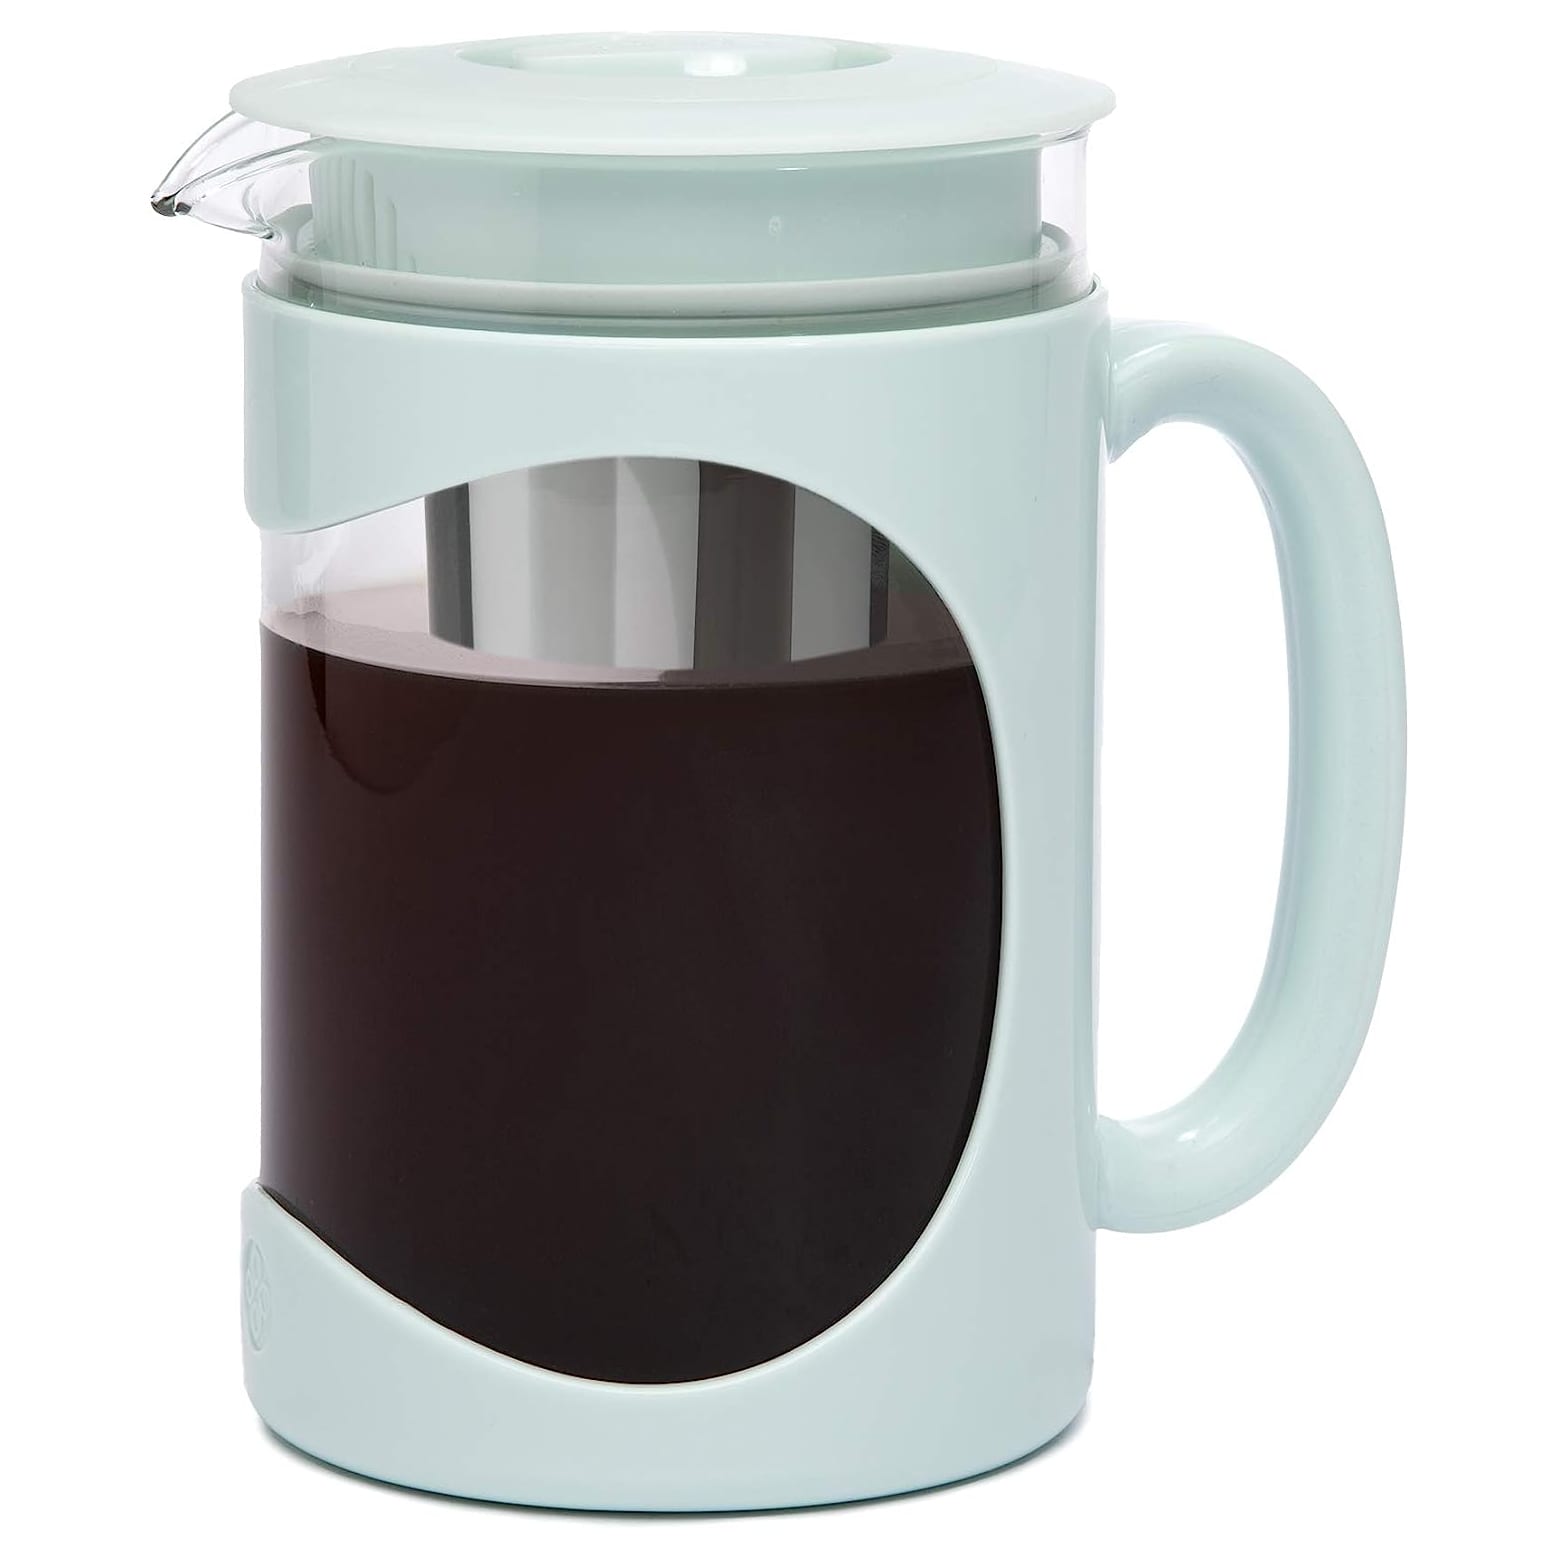 https://cdn.apartmenttherapy.info/image/upload/v1688409825/gen-workflow/product-database/primula-burke-deluxe-cold-brew-iced-coffee-maker-amazon.jpg